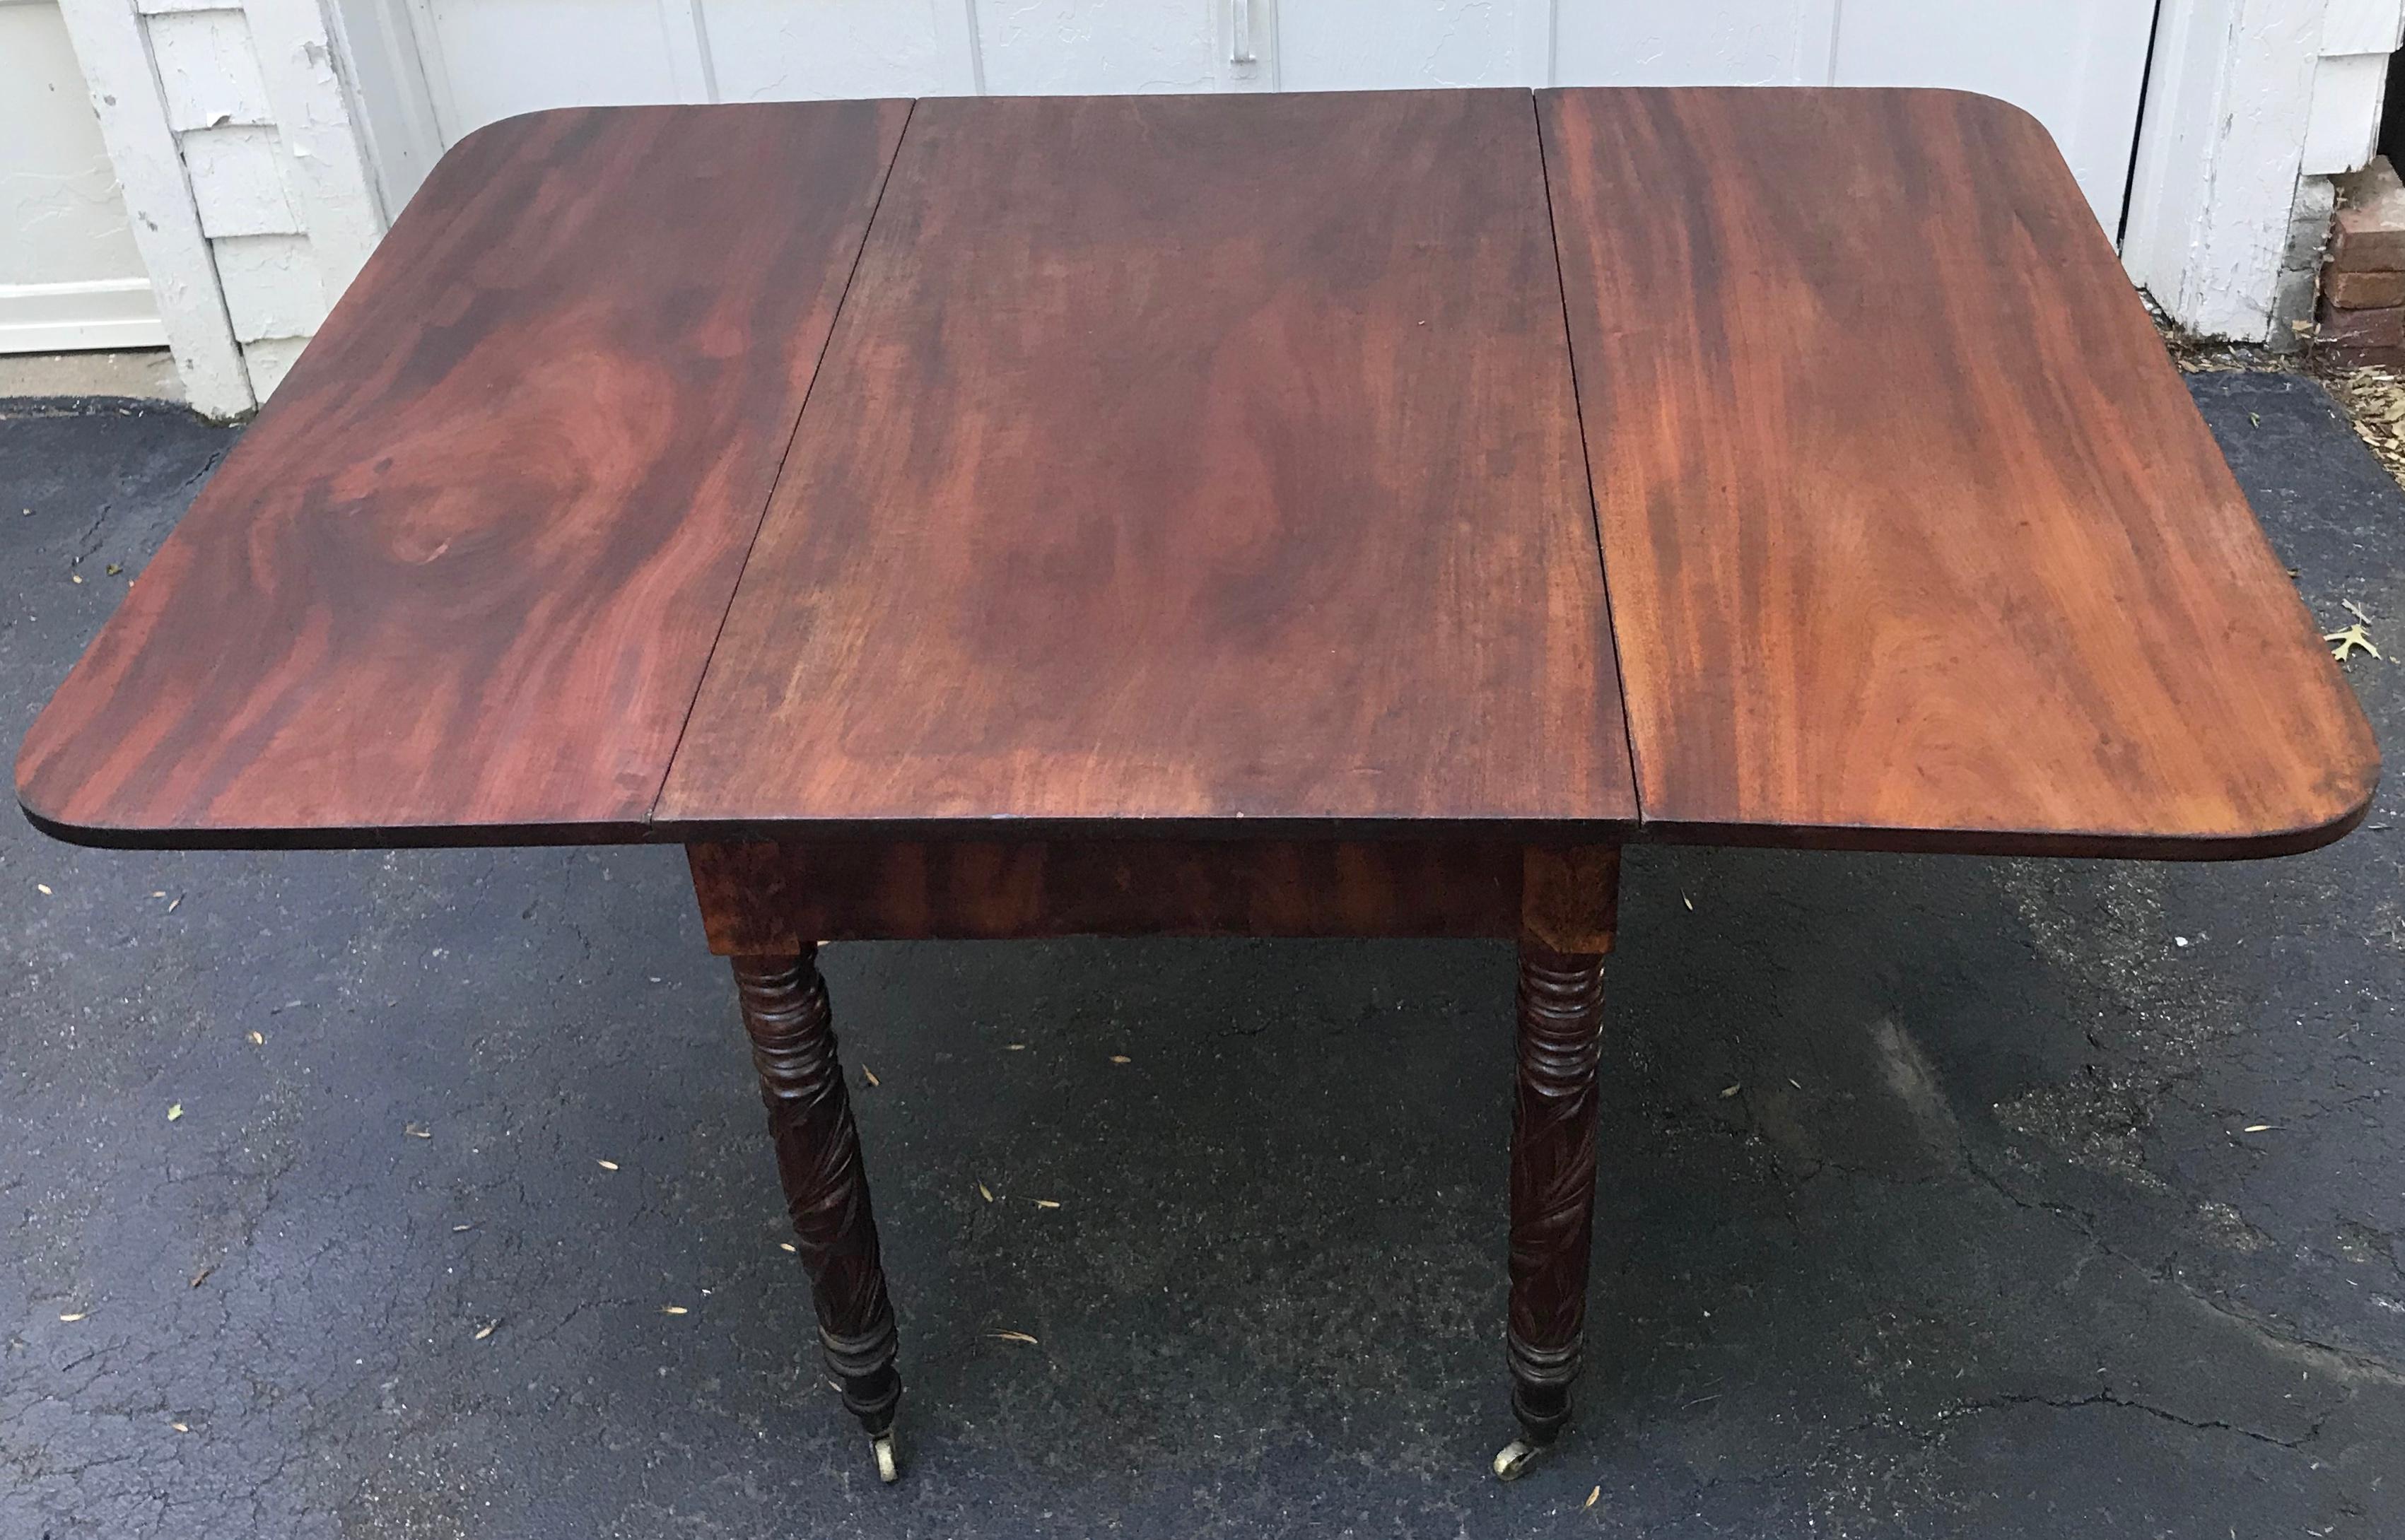 Federal Tobacco leaf carved leg table. Late Federal / American Empire mahogany drop-leaf table with hand carved tobacco leaf legs on original brass casters supporting a commodious central board with drop leaves. Dining table is 42